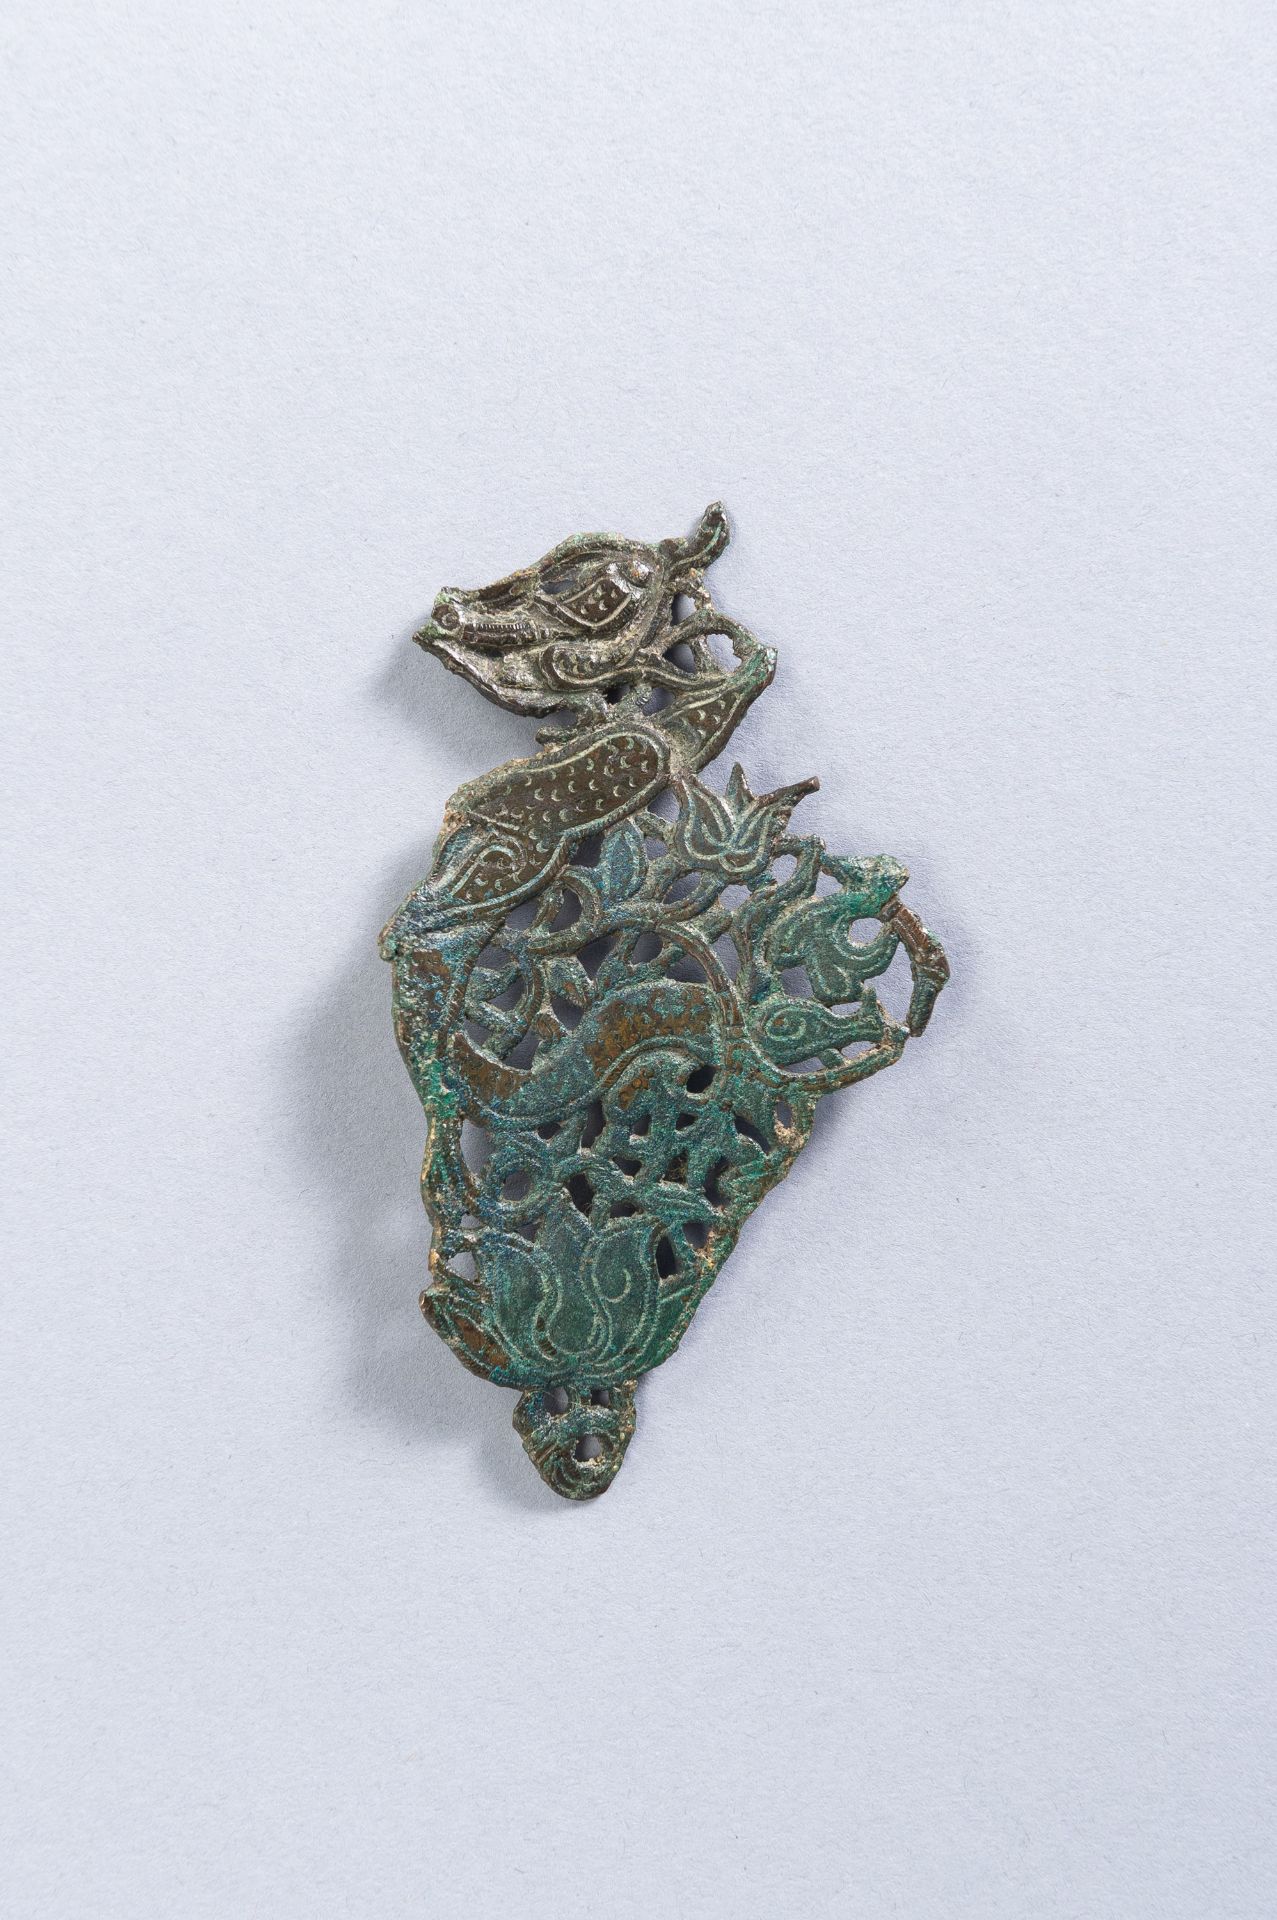 A CHINESE BRONZE ORNAMENT, TANG TO LIAO